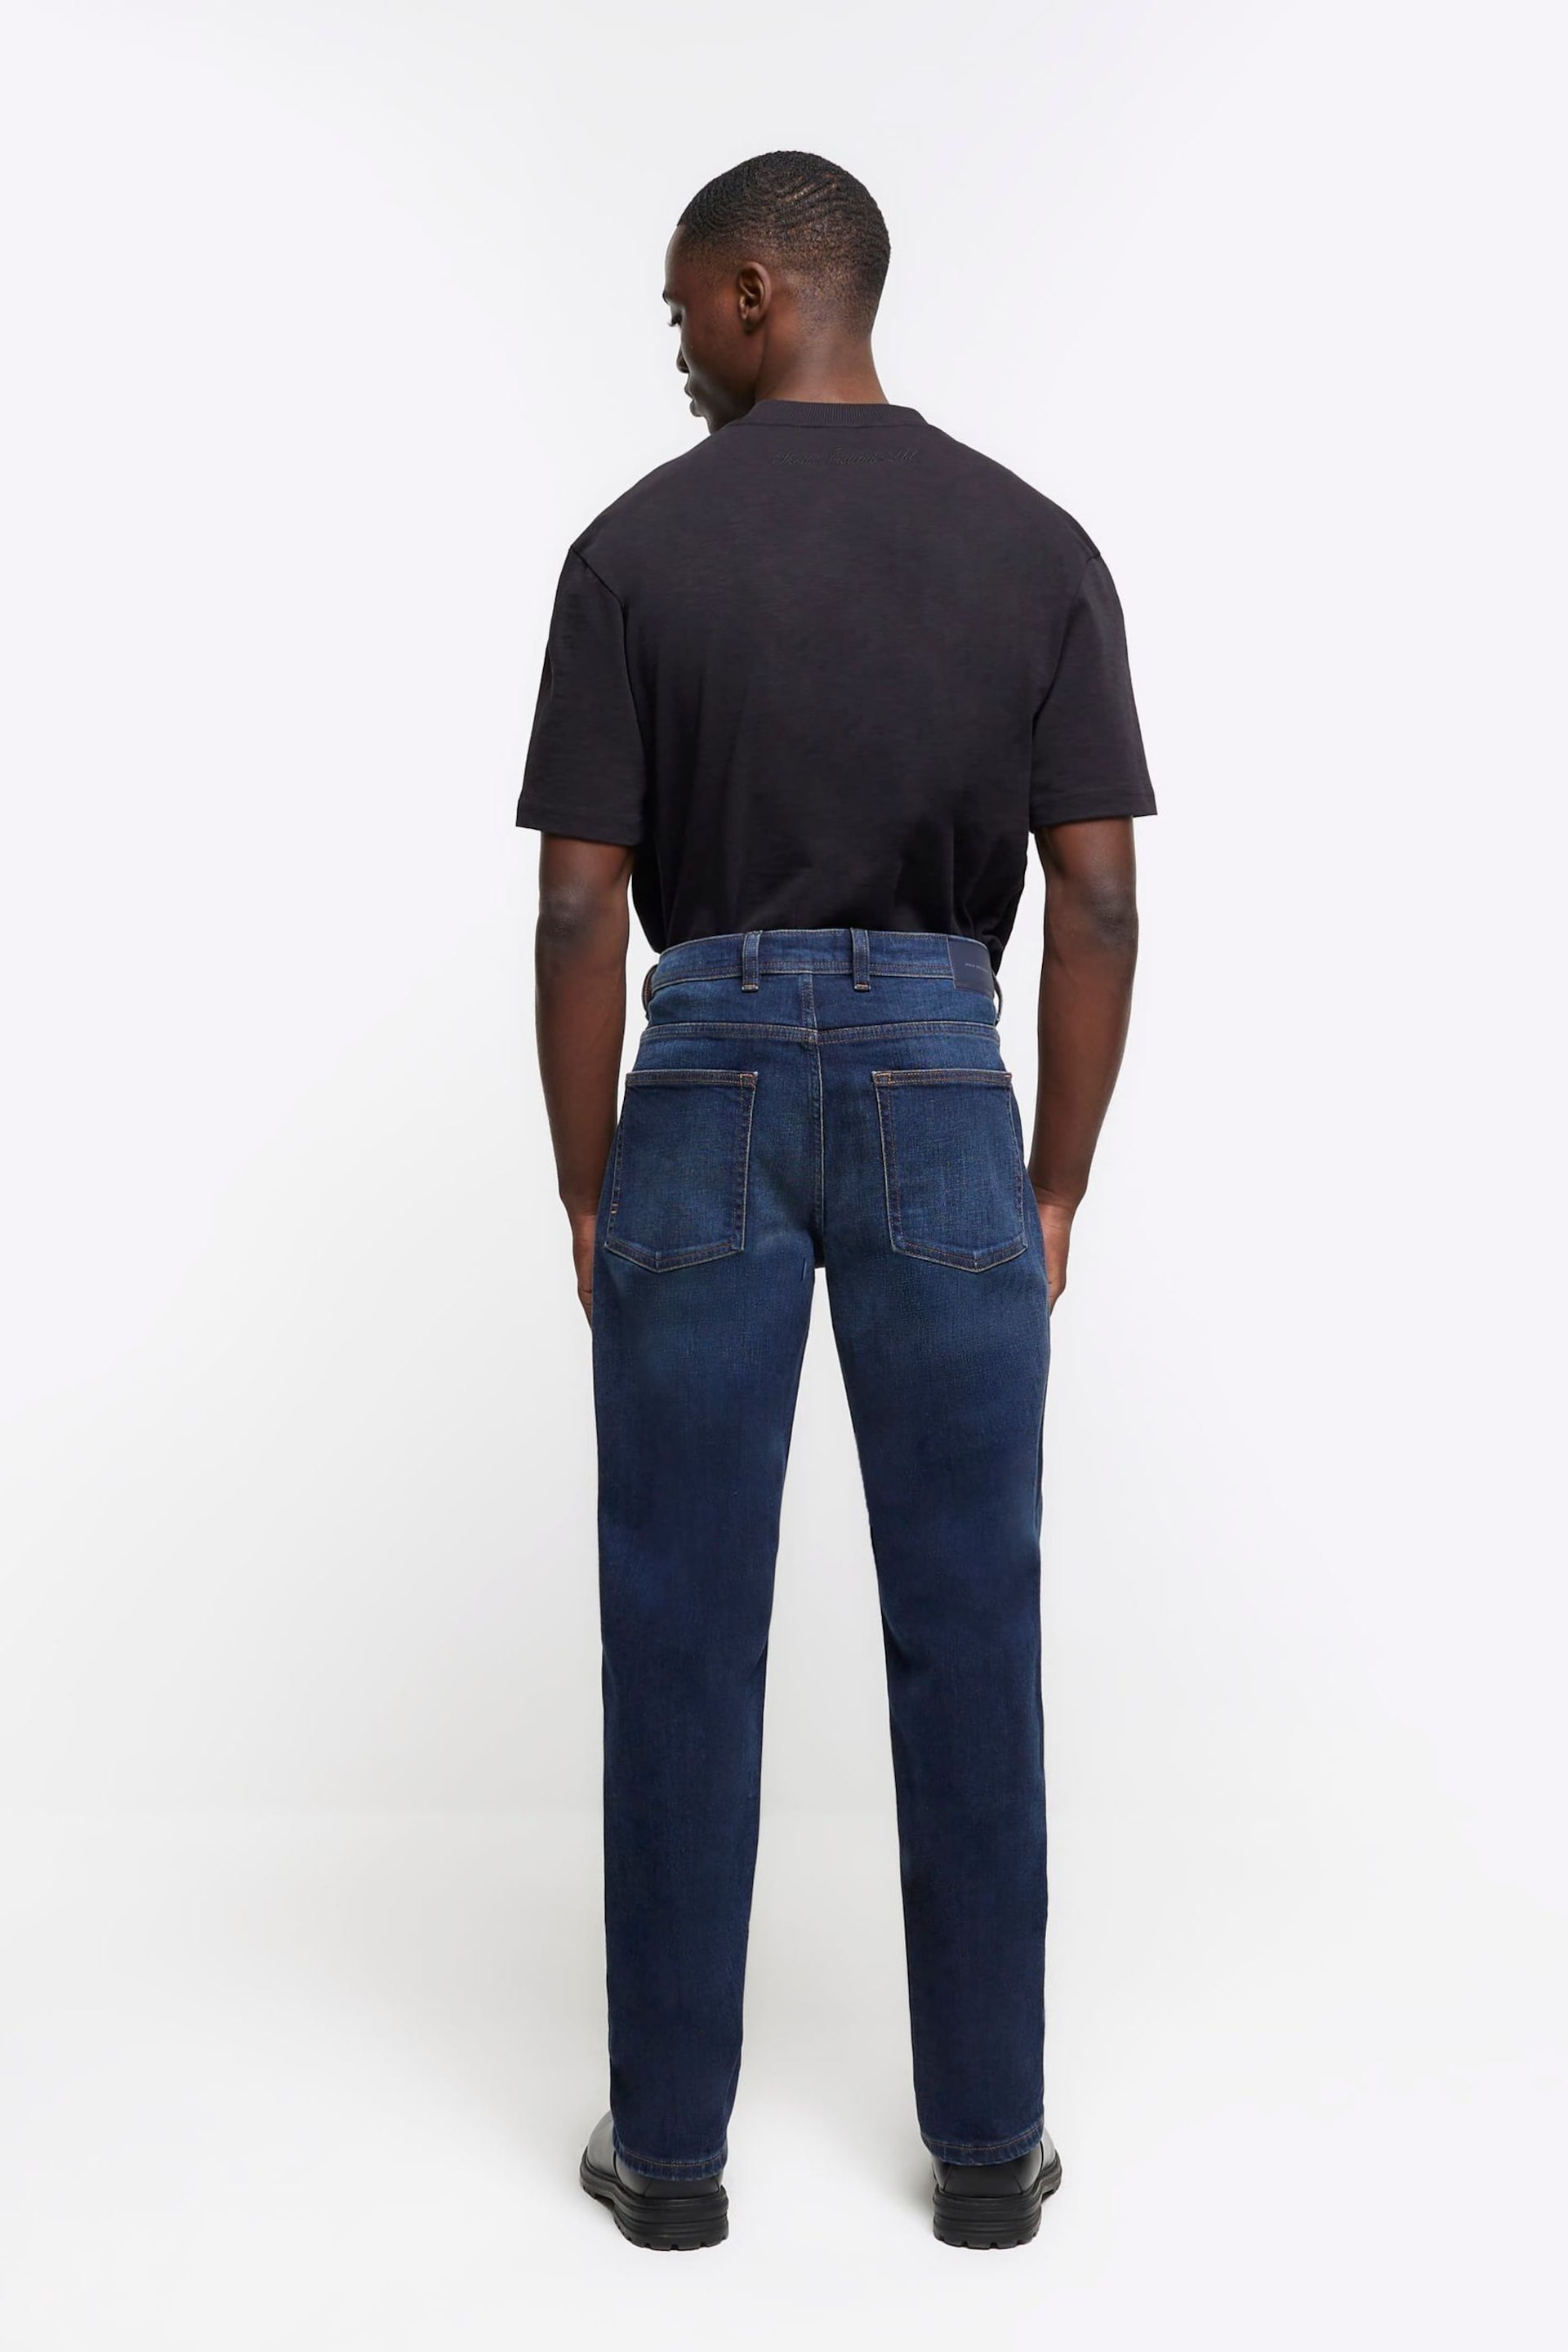 River Island Blue Straight Fit Jeans - Image 2 of 4